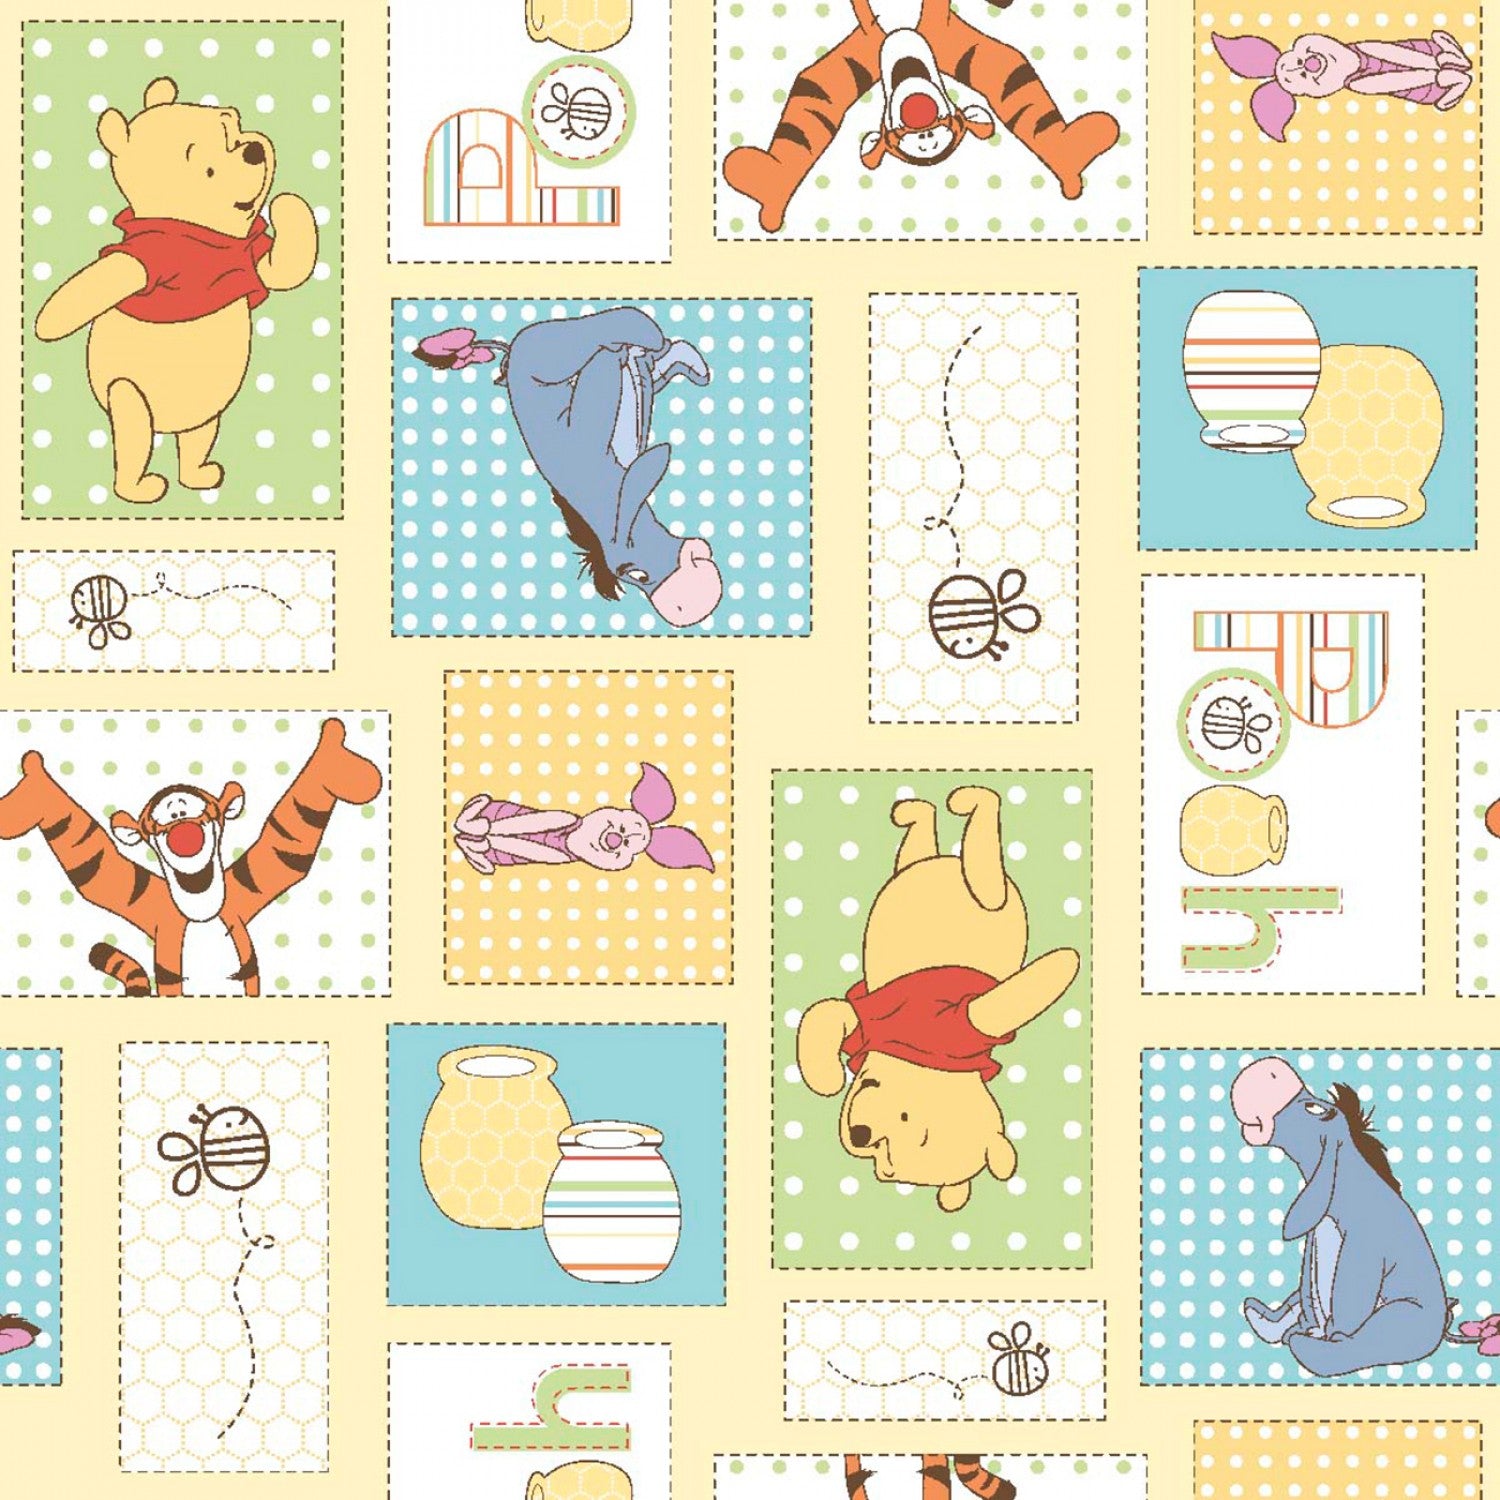 Springs Creative Disney Pooh and Friends White Tossed Fabric